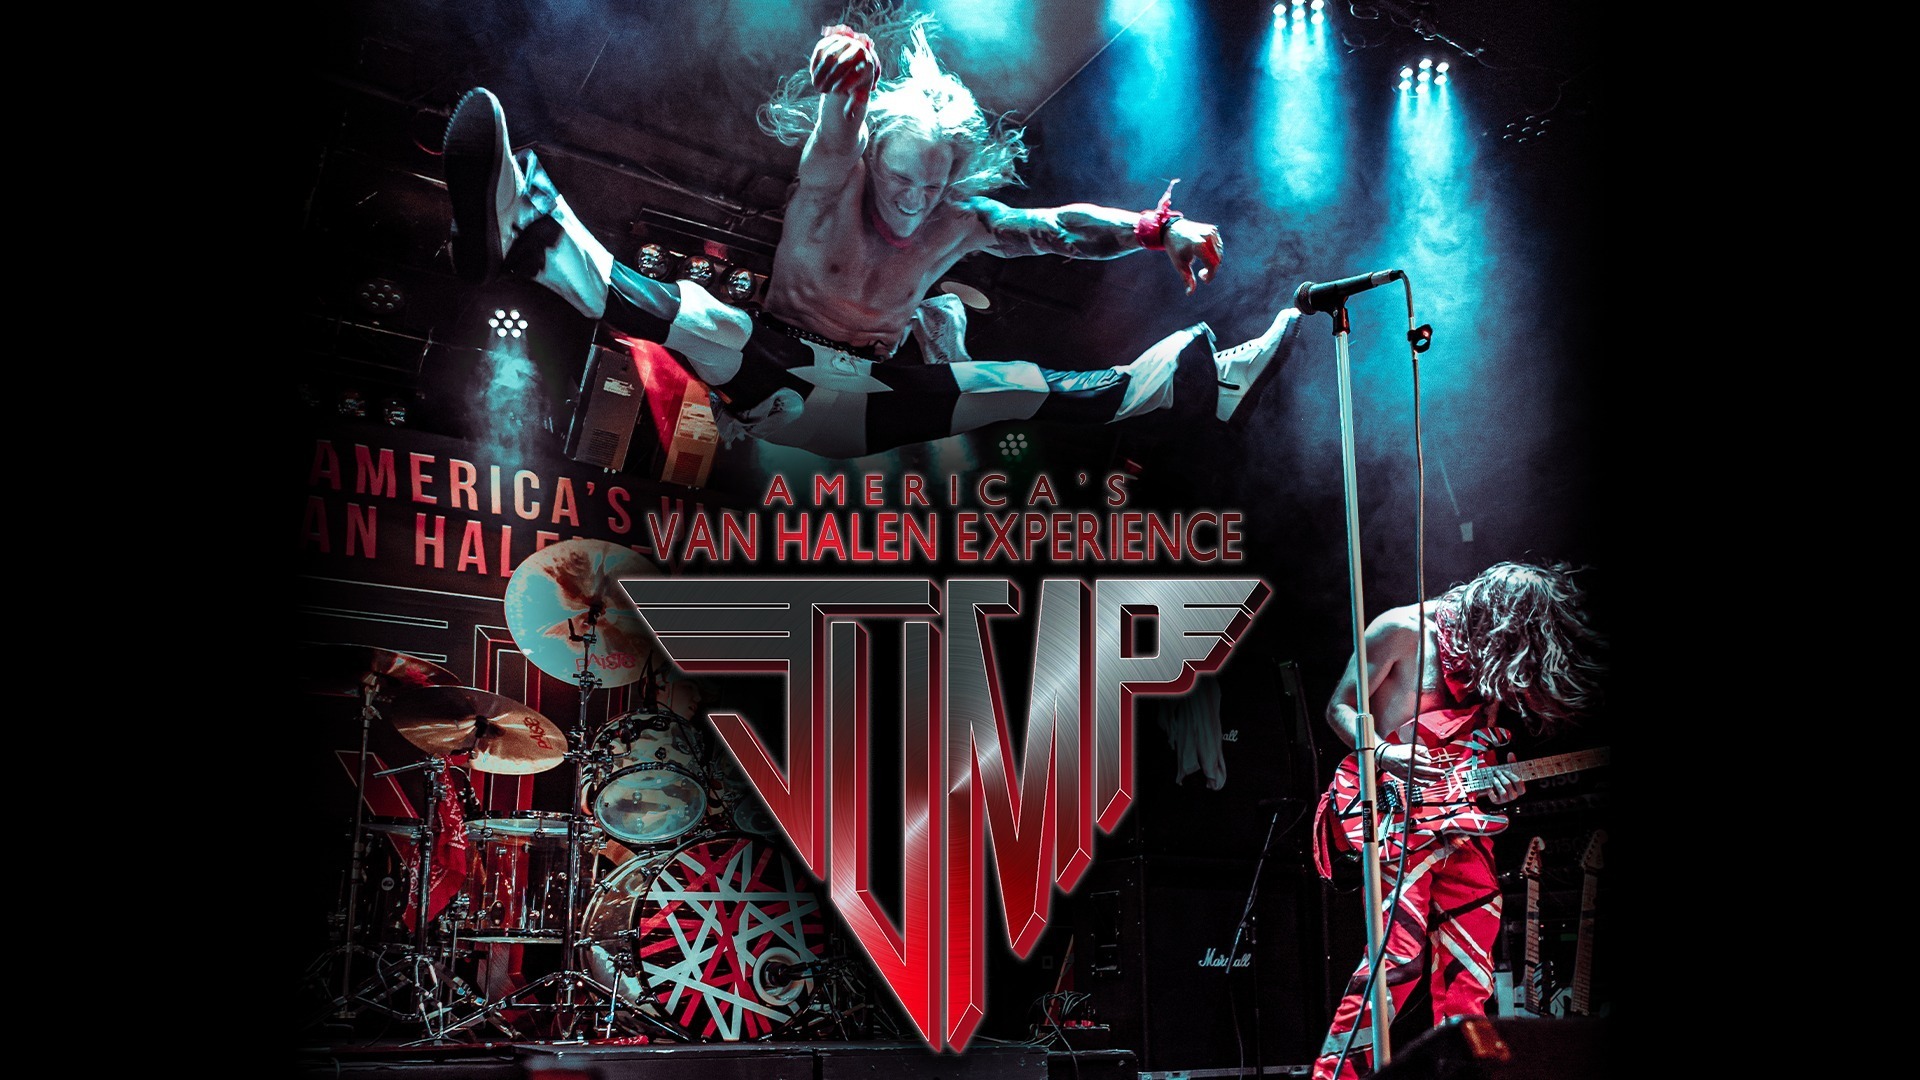 "Jump" Van Halen Tribute with opening act "Classic Rock Experience", La Porte, Indiana, United States